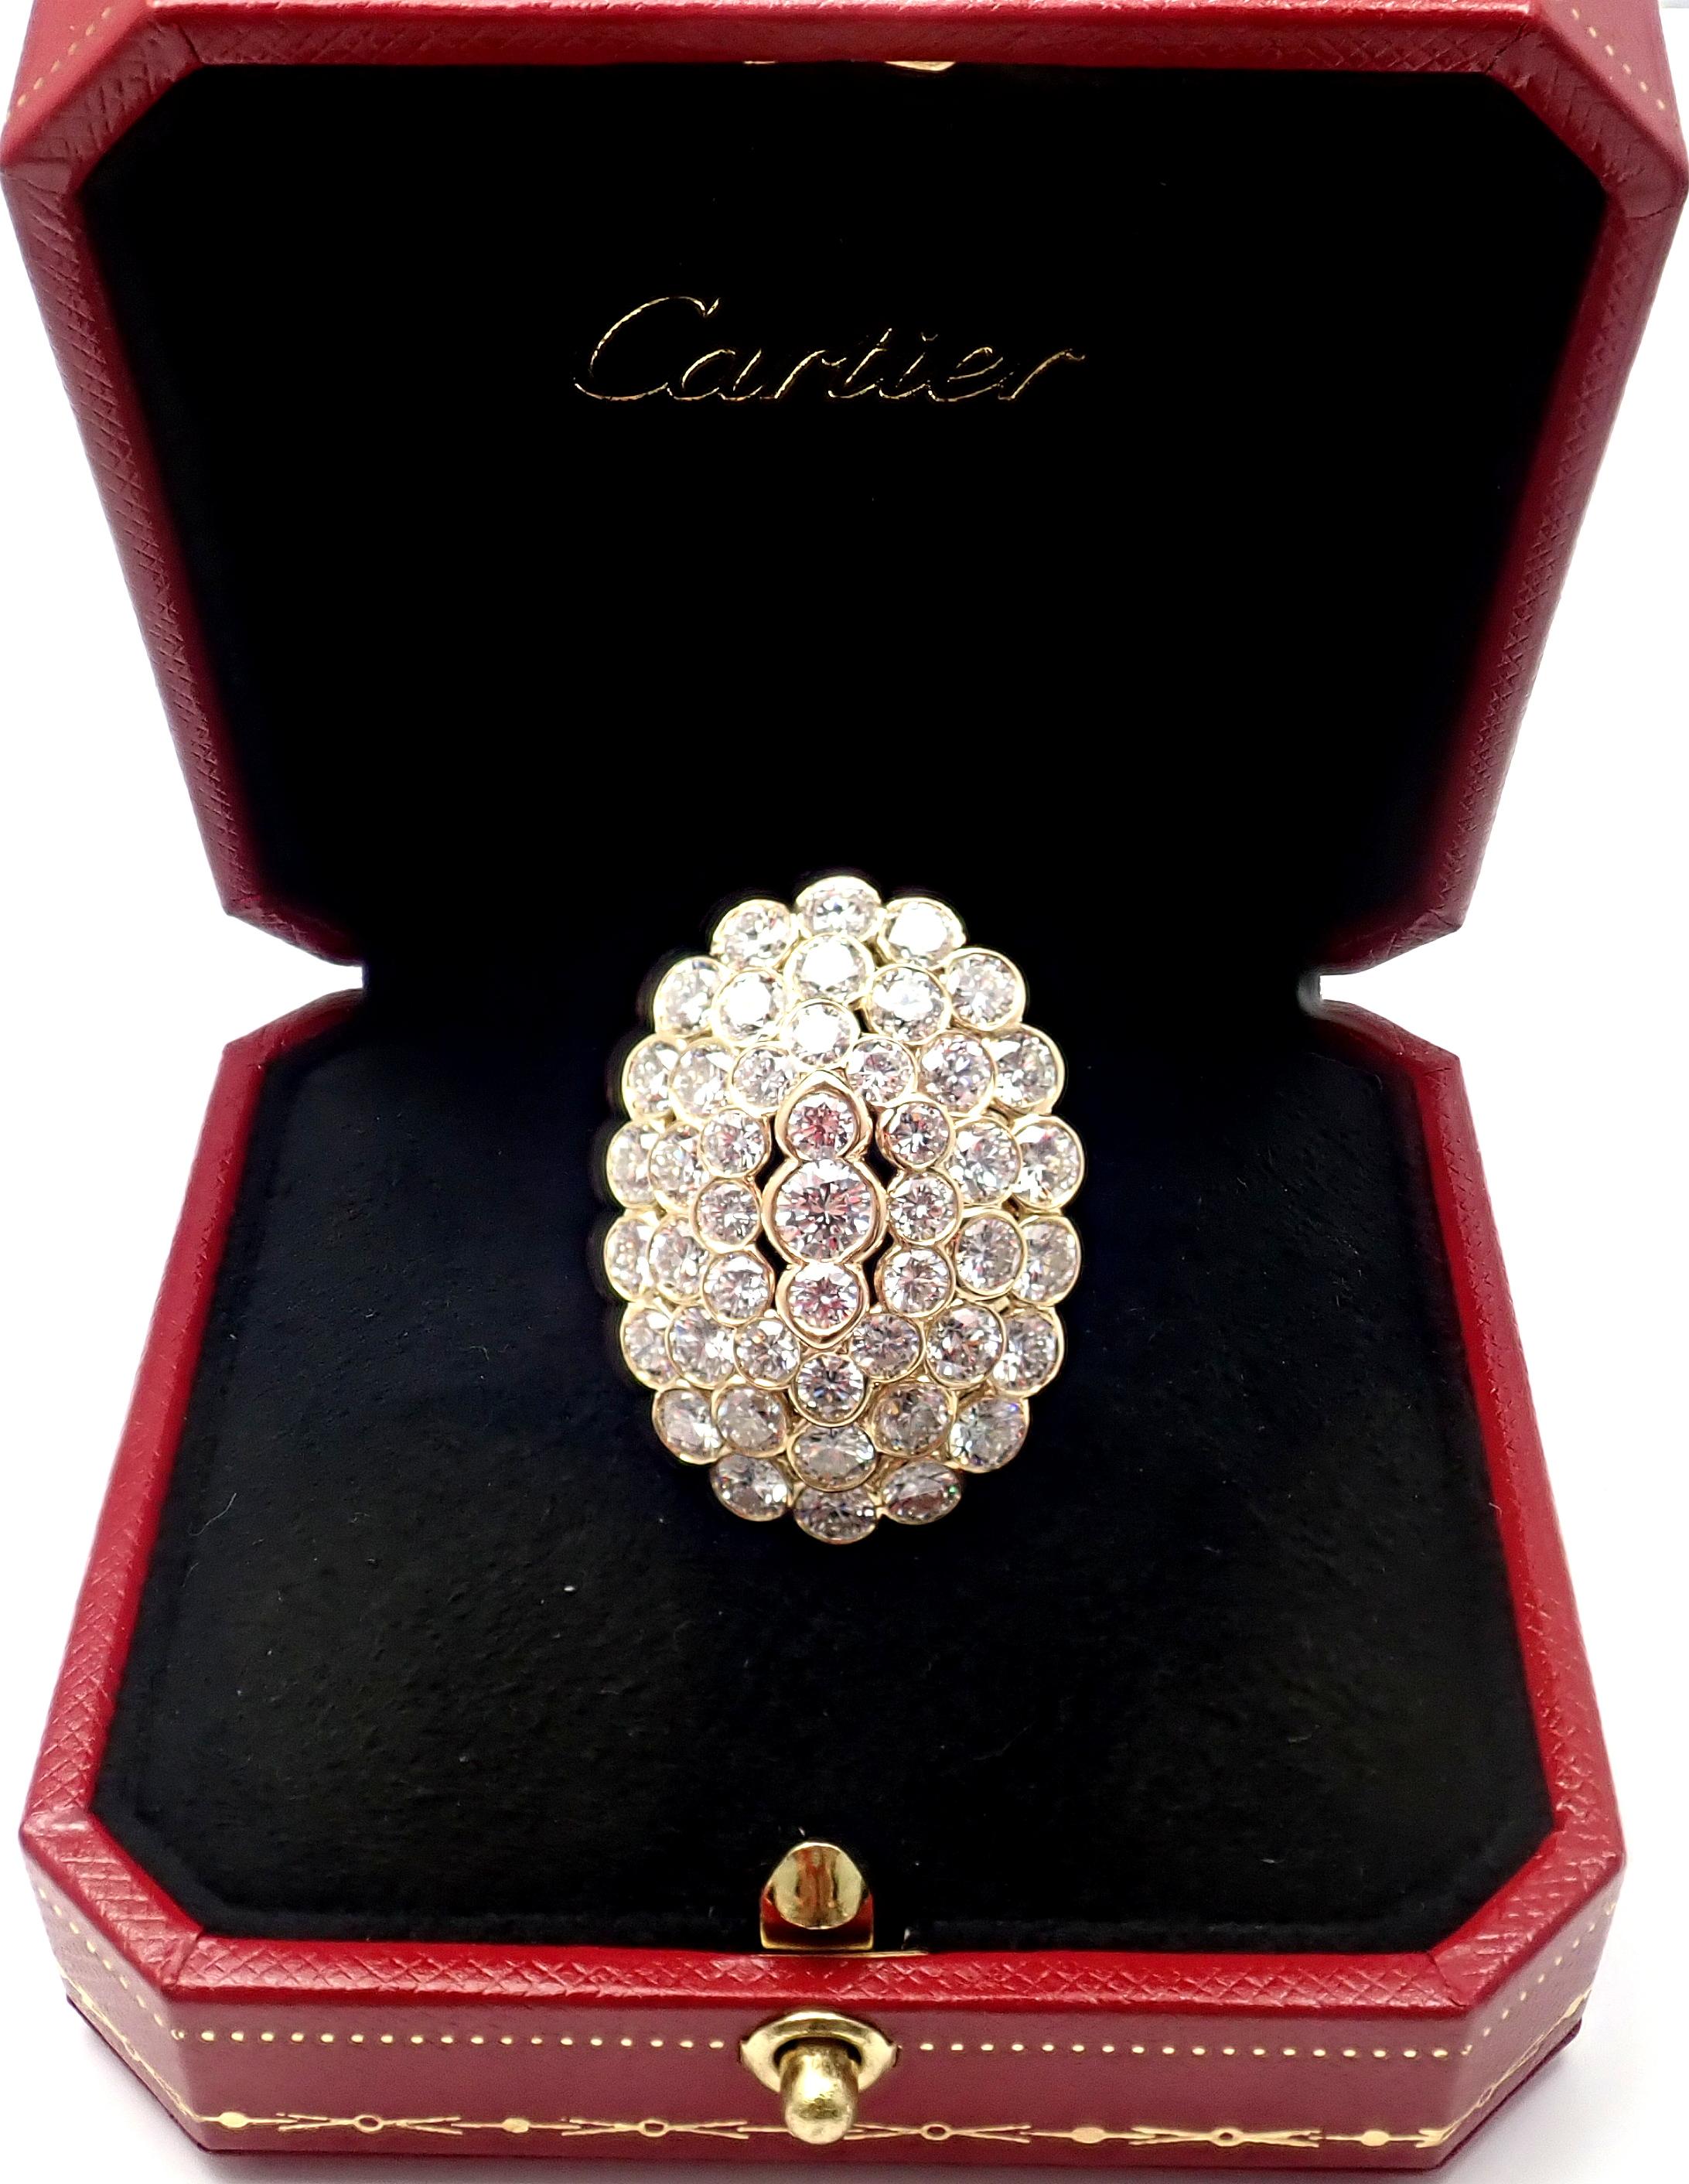 18k Yellow Gold Diamond Cocktail Ring by Cartier.
With 47 round brilliant cut diamonds VVS1 clarity, F-H color 
total weight approx. 9.5ct
This ring comes with original Cartier box and Cartier service paper.
Details:
Size: 6
Weight: 9.6 grams
Width: